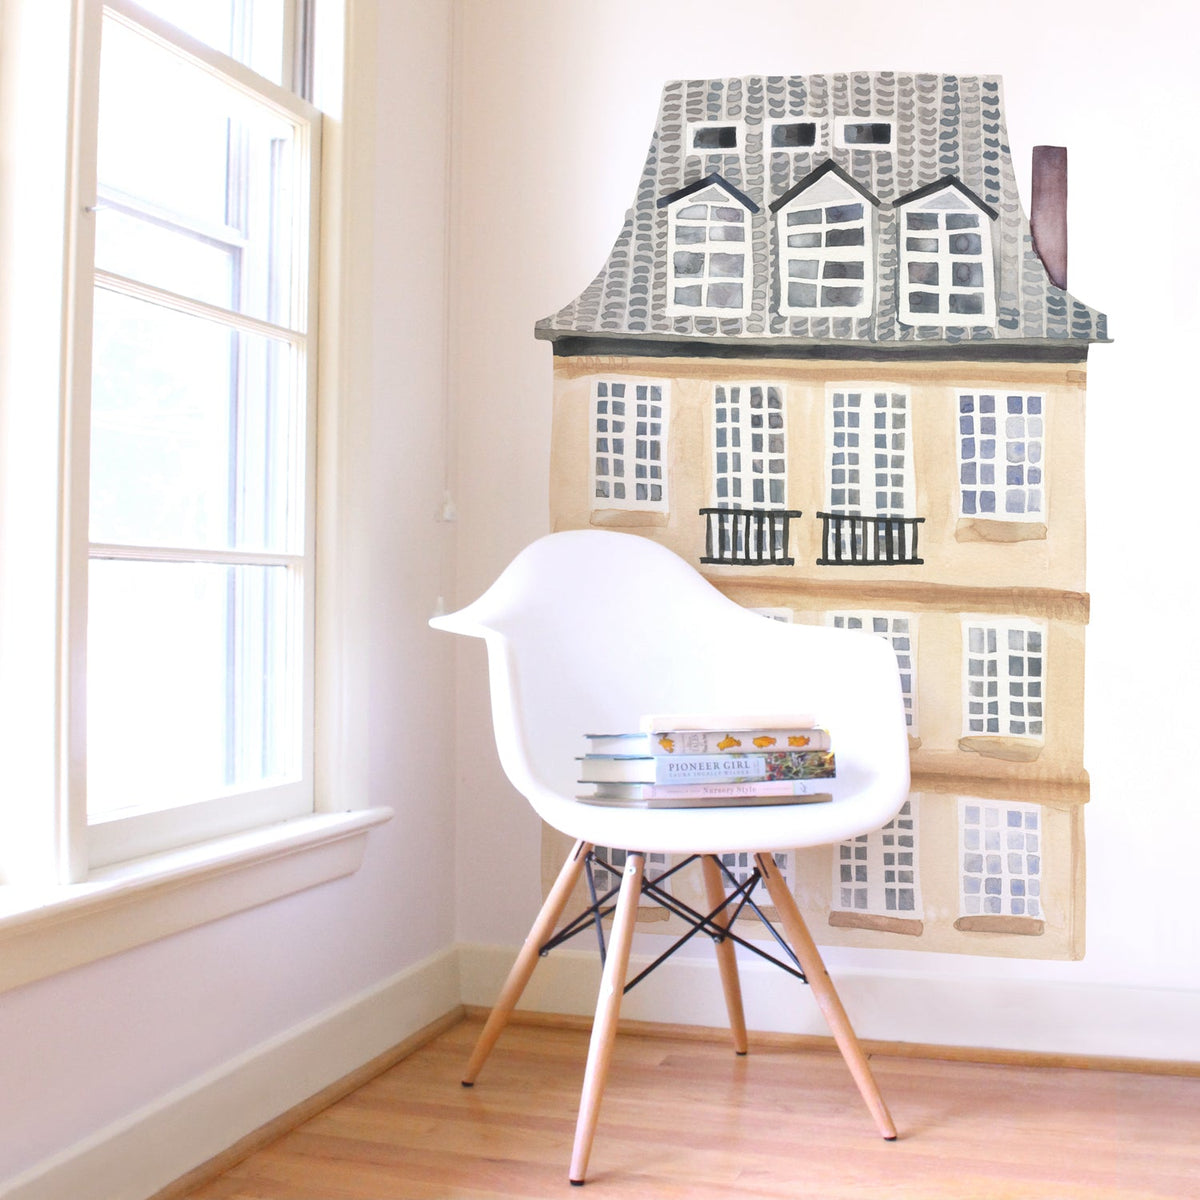 Shortbread House Wall Decal